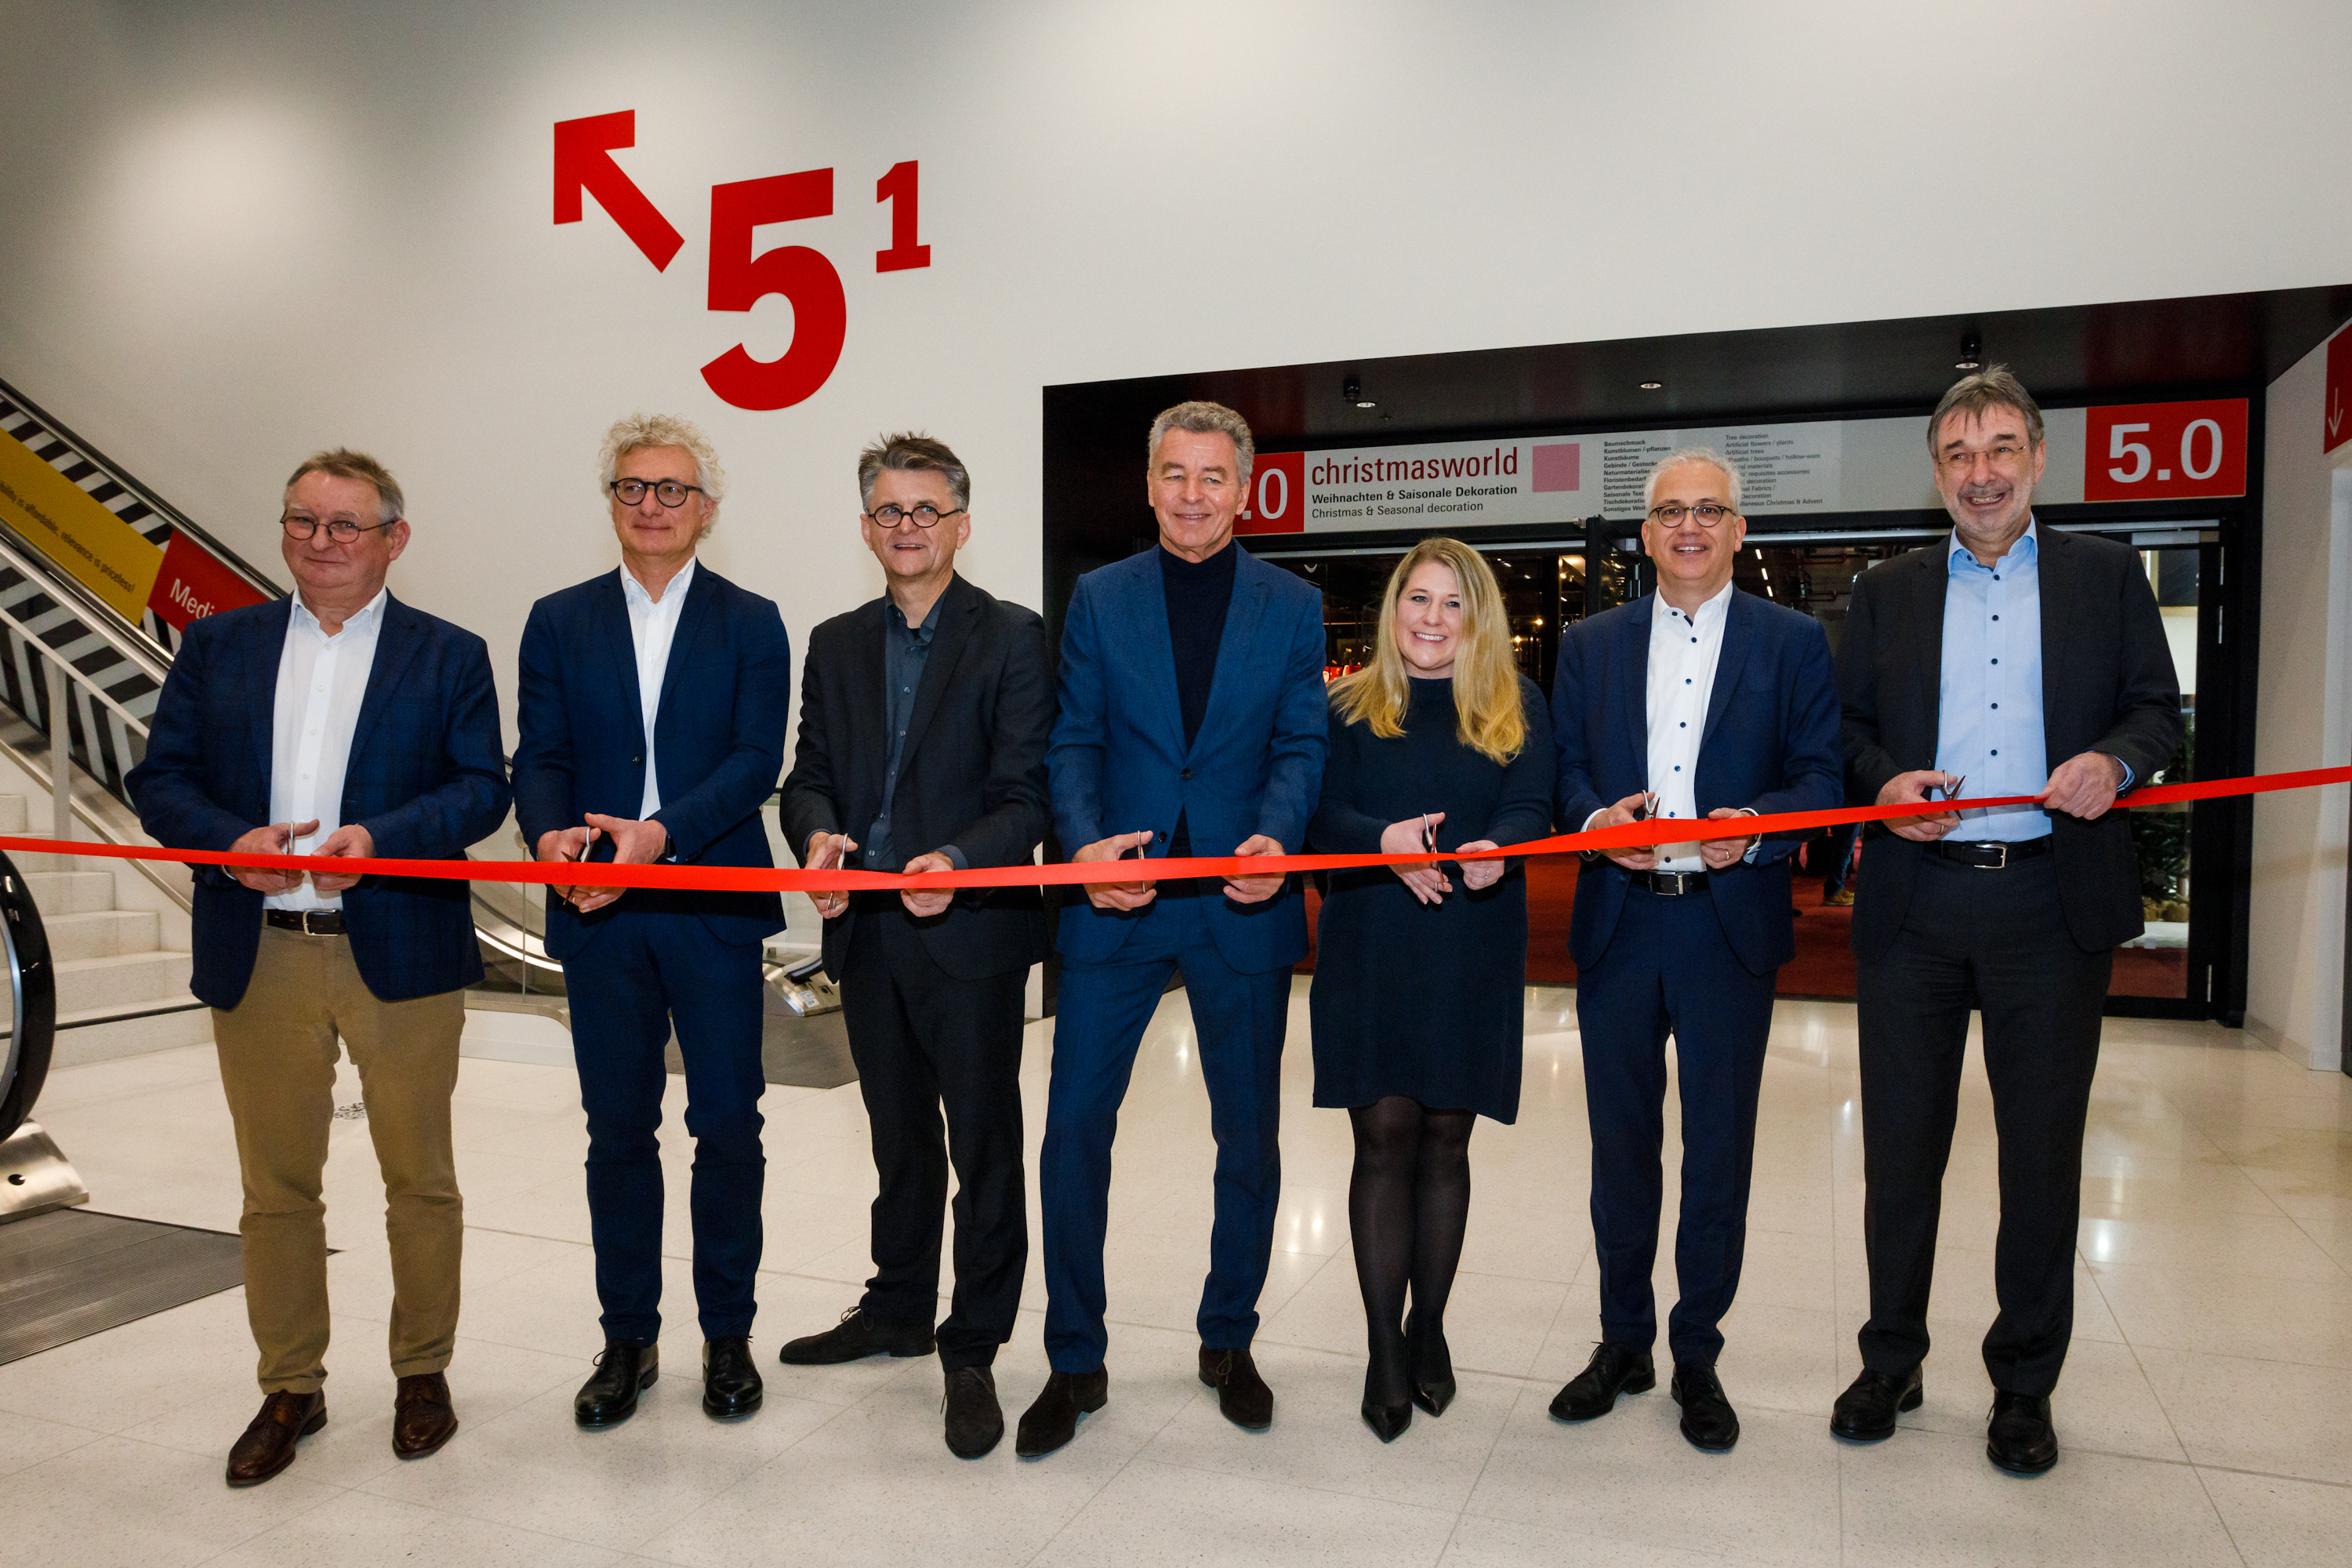 Cutting the ribbon in the south-east foyer of Hall 5 (from left to right): Burkhard Schmidt (Managing Director Zech  Group SE), Prof. Helmut Kleine-Kraneburg (Gruber + Kleine-Kraneburg Architekten), Martin Gruber (Gruber +  Kleine-Kraneburg Architekten), Detlef Braun (Member of the Messe Frankfurt Executive Board), Stephanie Wüst  (City Councillor and Messe Frankfurt Supervisory Board Chairperson), Tarek Al-Wazir (Minister of Economics,  Energy, Transport and Housing of the State of Hesse), Uwe Behm (Member of the Messe Frankfurt Executive  Board).